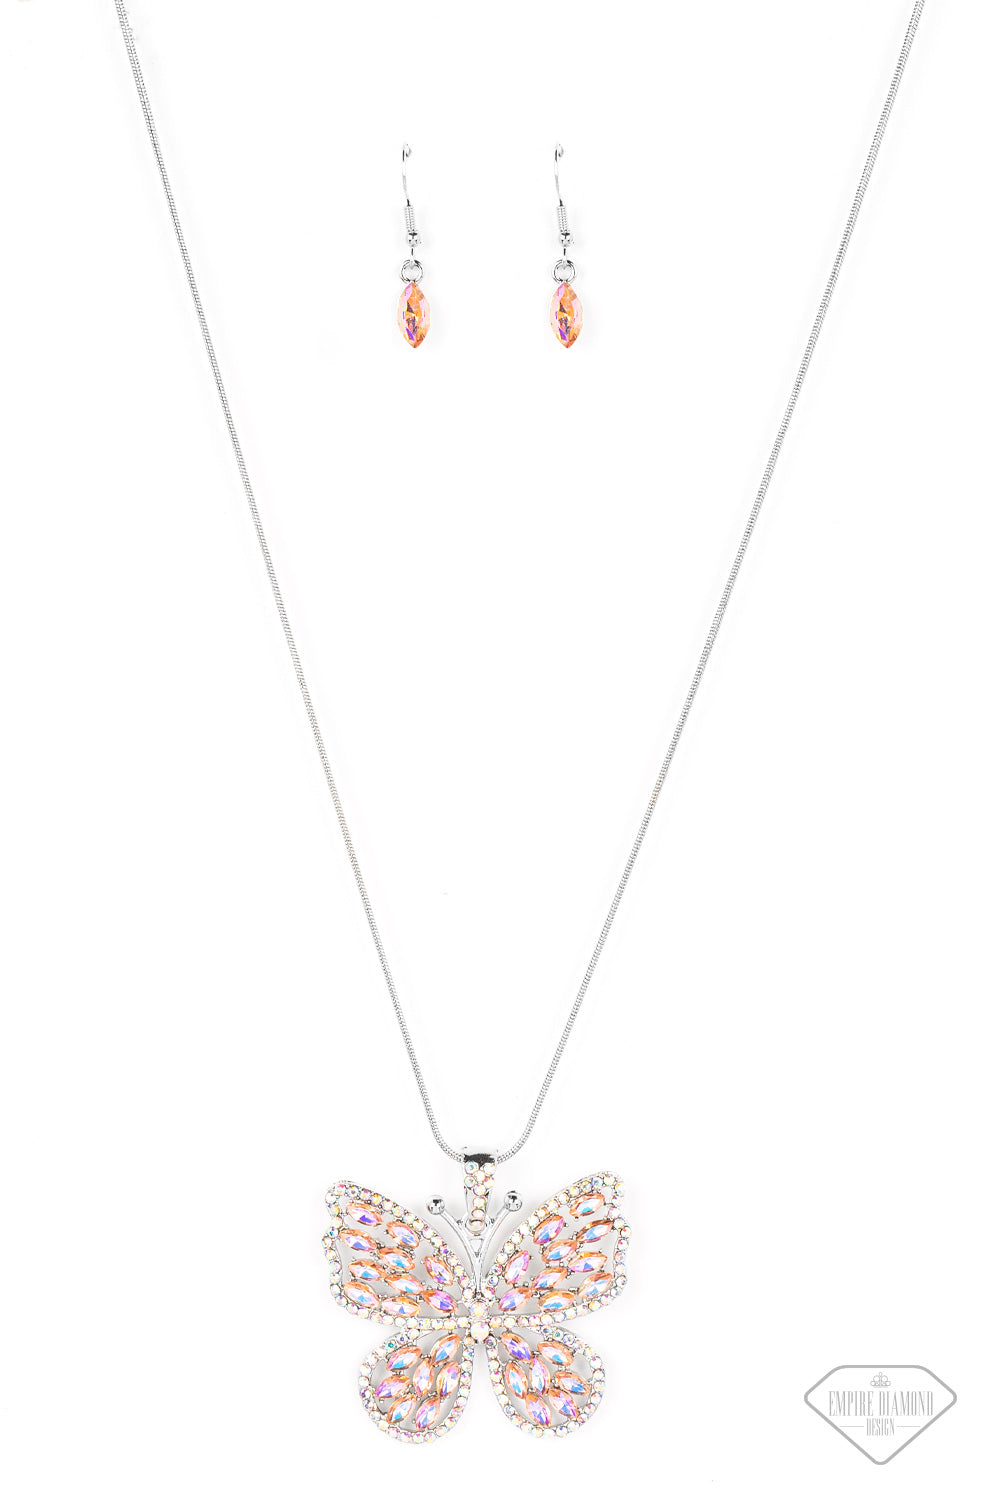 Paparazzi Fame and FLUTTER - Multi Butterfly Necklace - Empire Diamond Exclusive